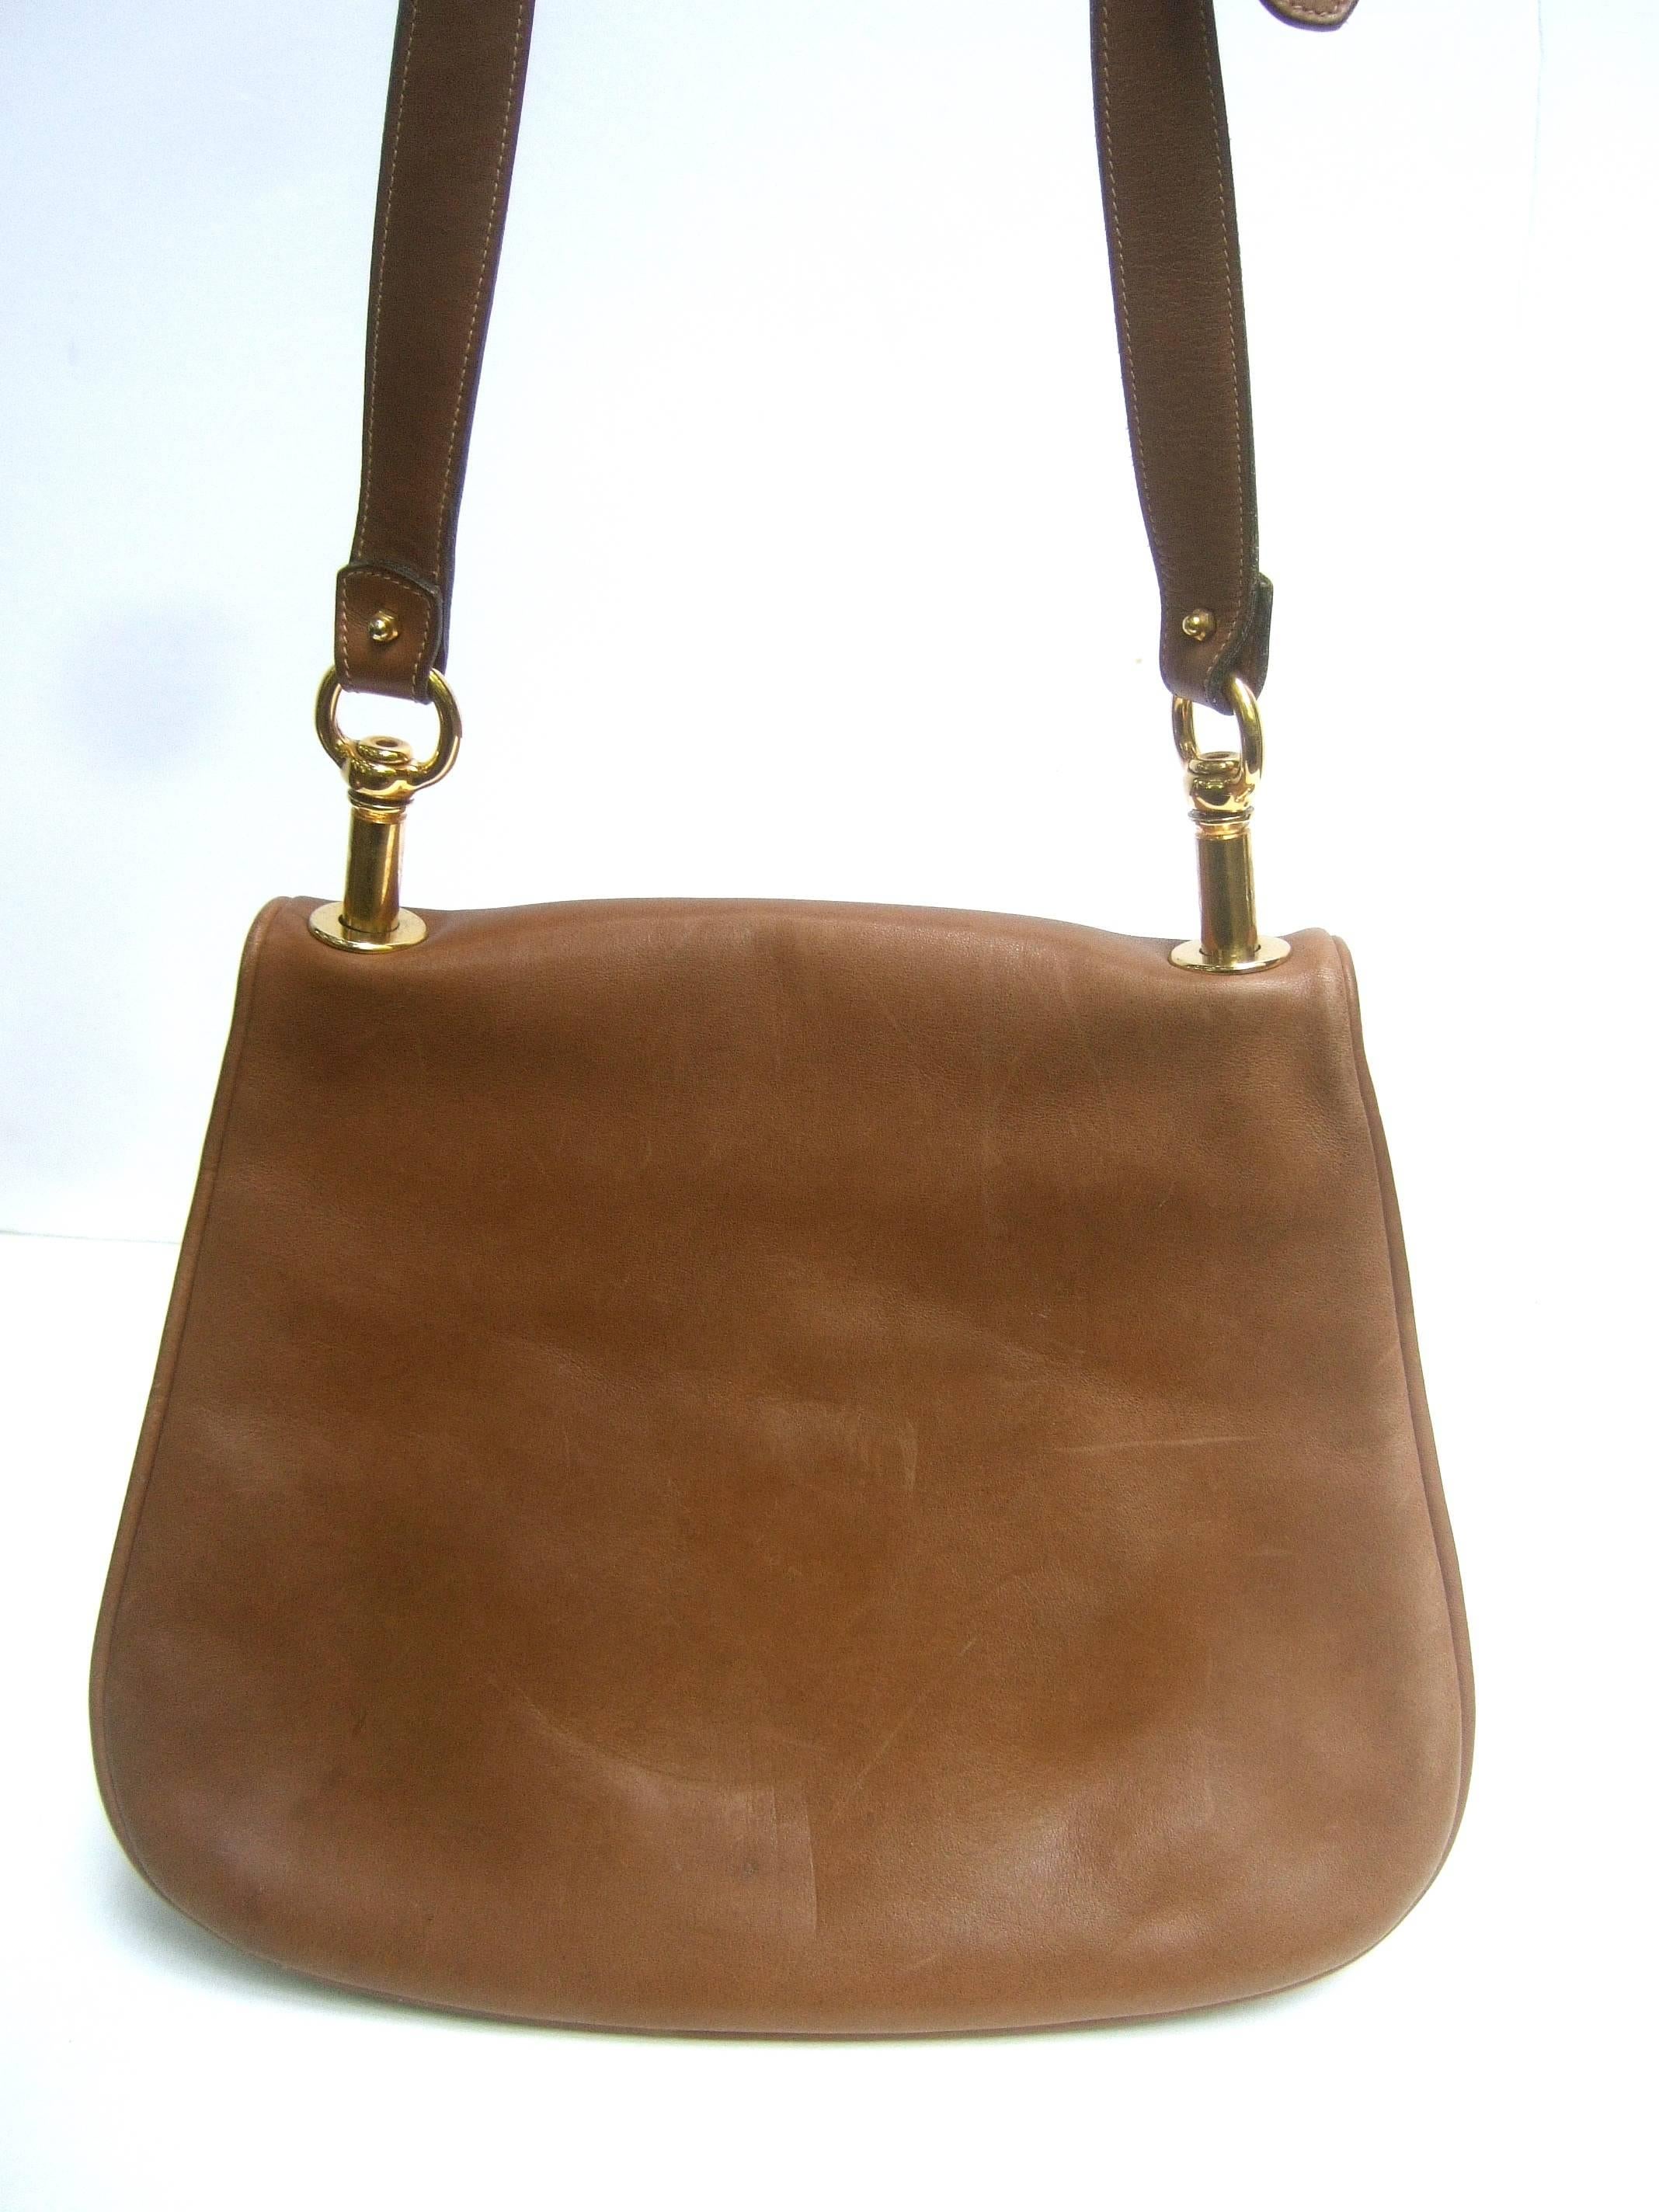 Women's Gucci Italy Caramel Brown Leather Blondie Shoulder Bag c 1970s